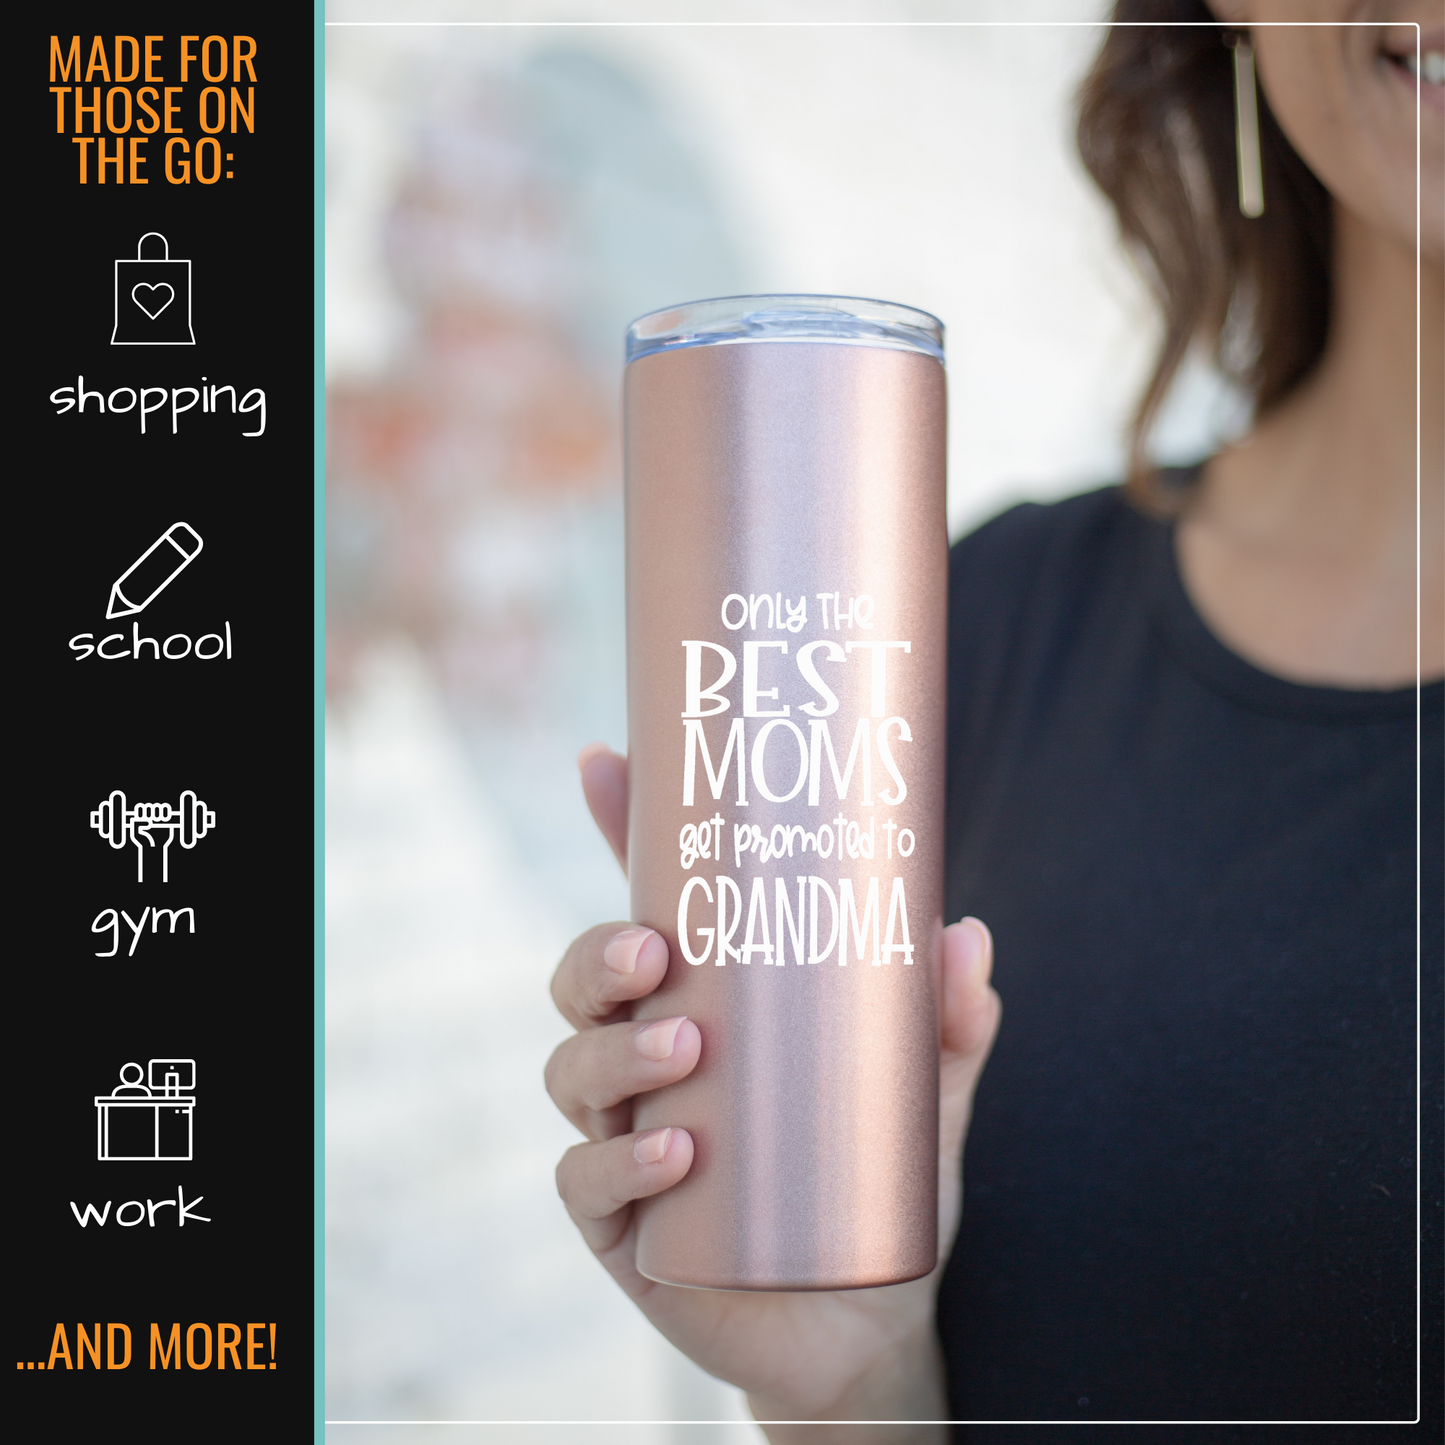 Best Moms Promoted to Grandma 20 oz Rose Gold Skinny Tumbler for Grandmothers - Outlet Deal Texas